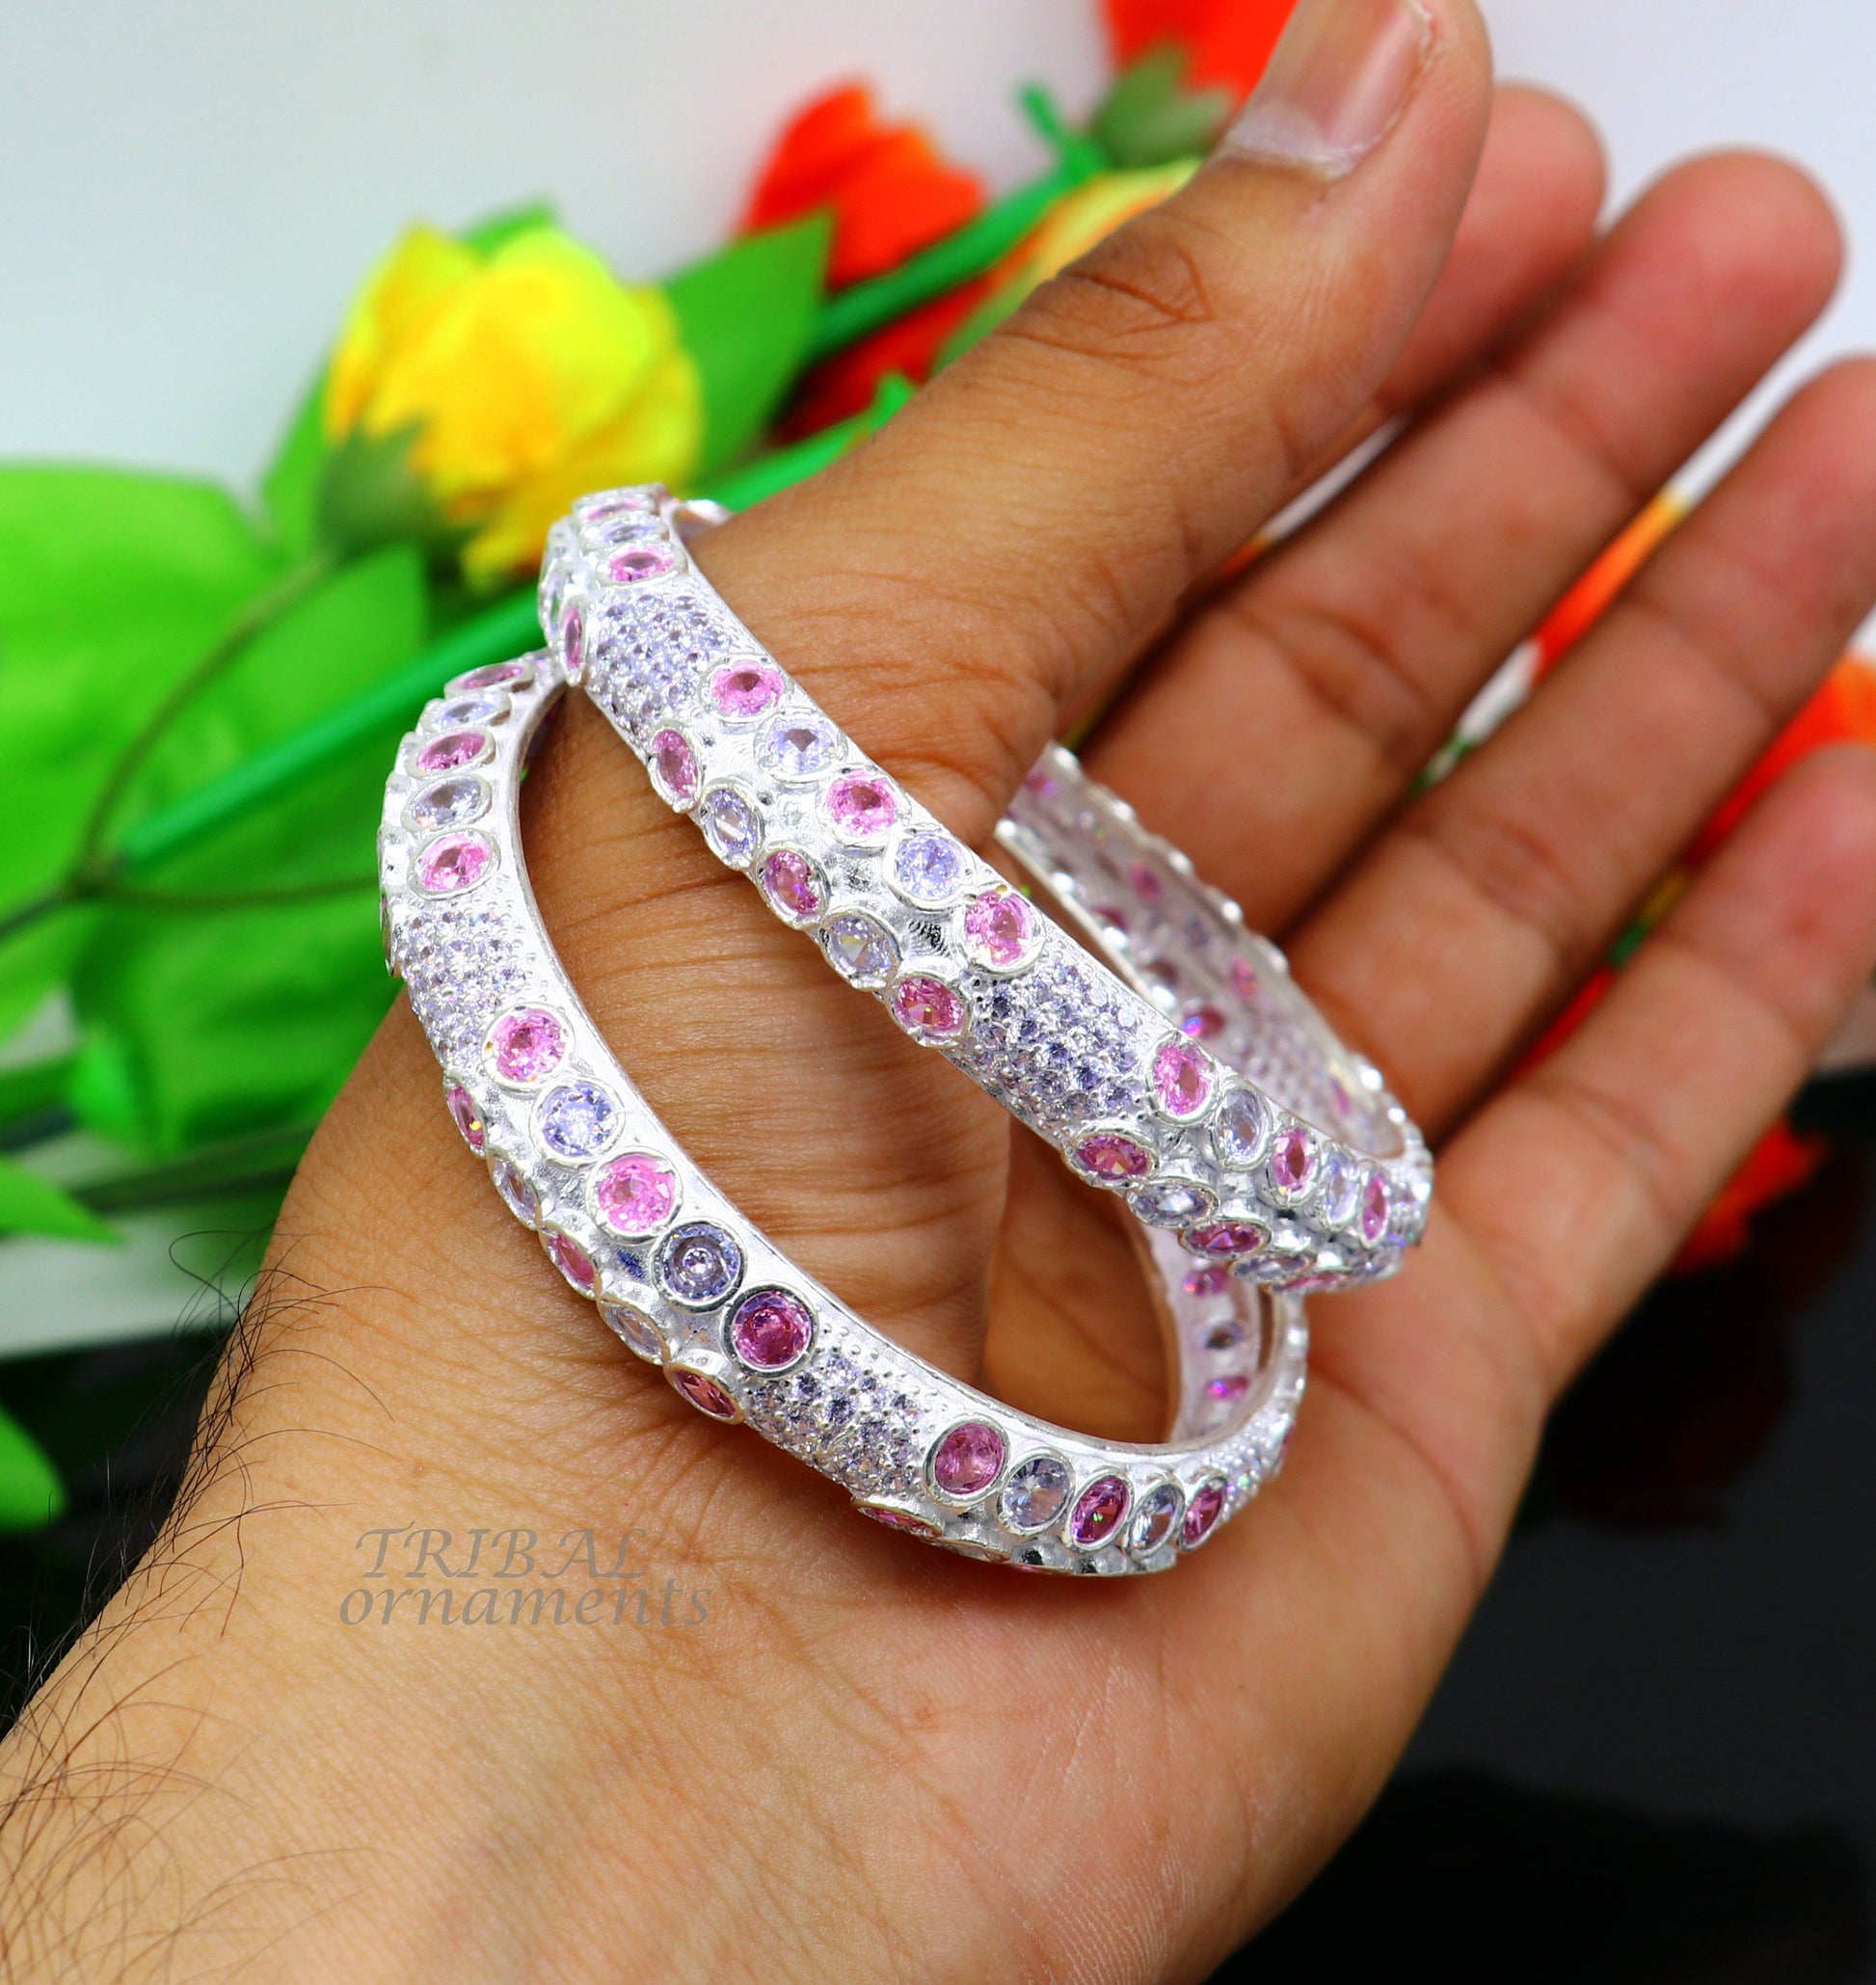 925 sterling silver handmade gorgeous multicolor stone stone stylish bangle excellent brides Wedding tribal personalized jewelry ba168 - TRIBAL ORNAMENTS